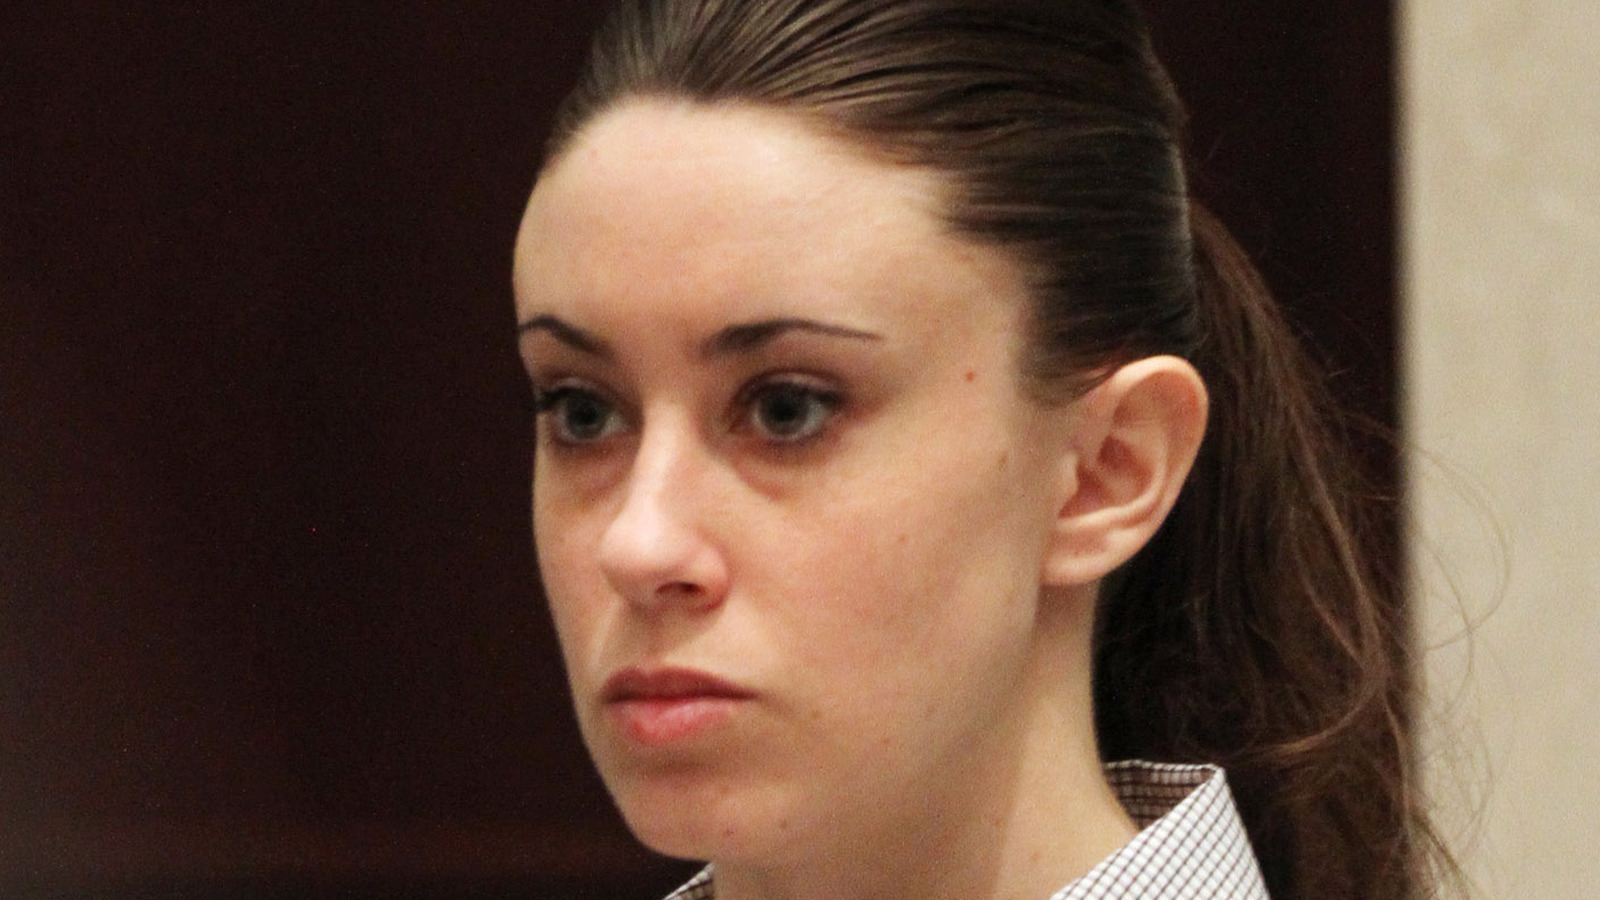 Casey Anthony Details Allegations Against Her Father In Revealing New Documentary 247 News